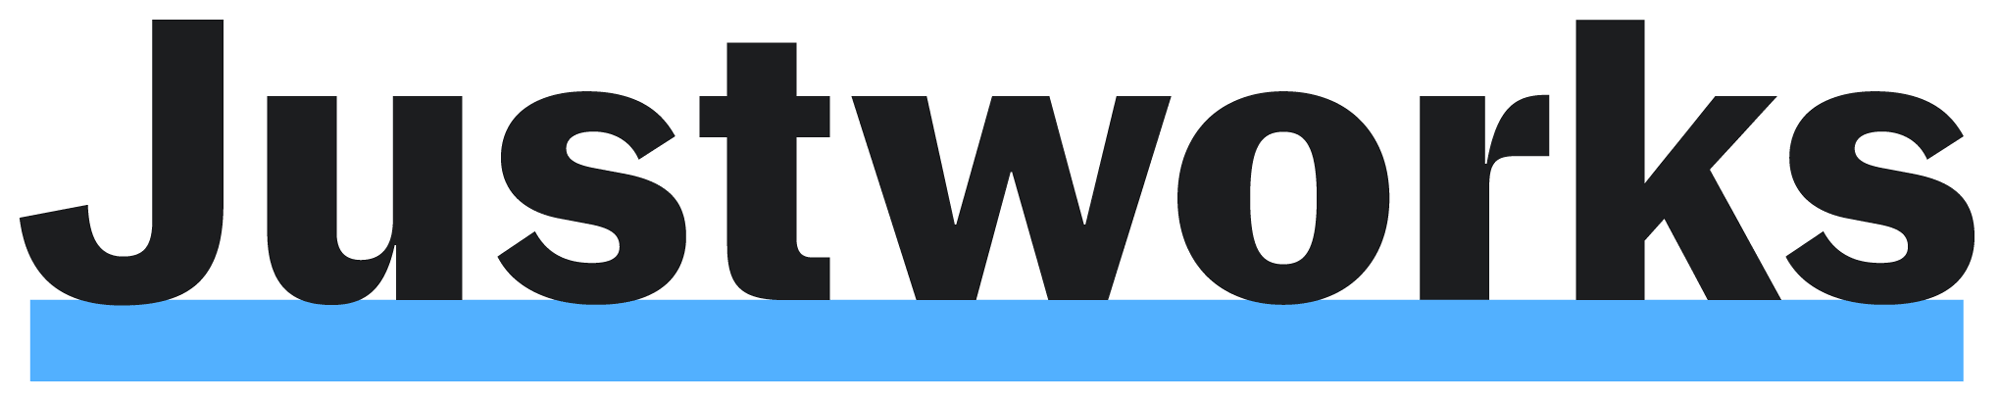 justworks_logo.png — Are.na